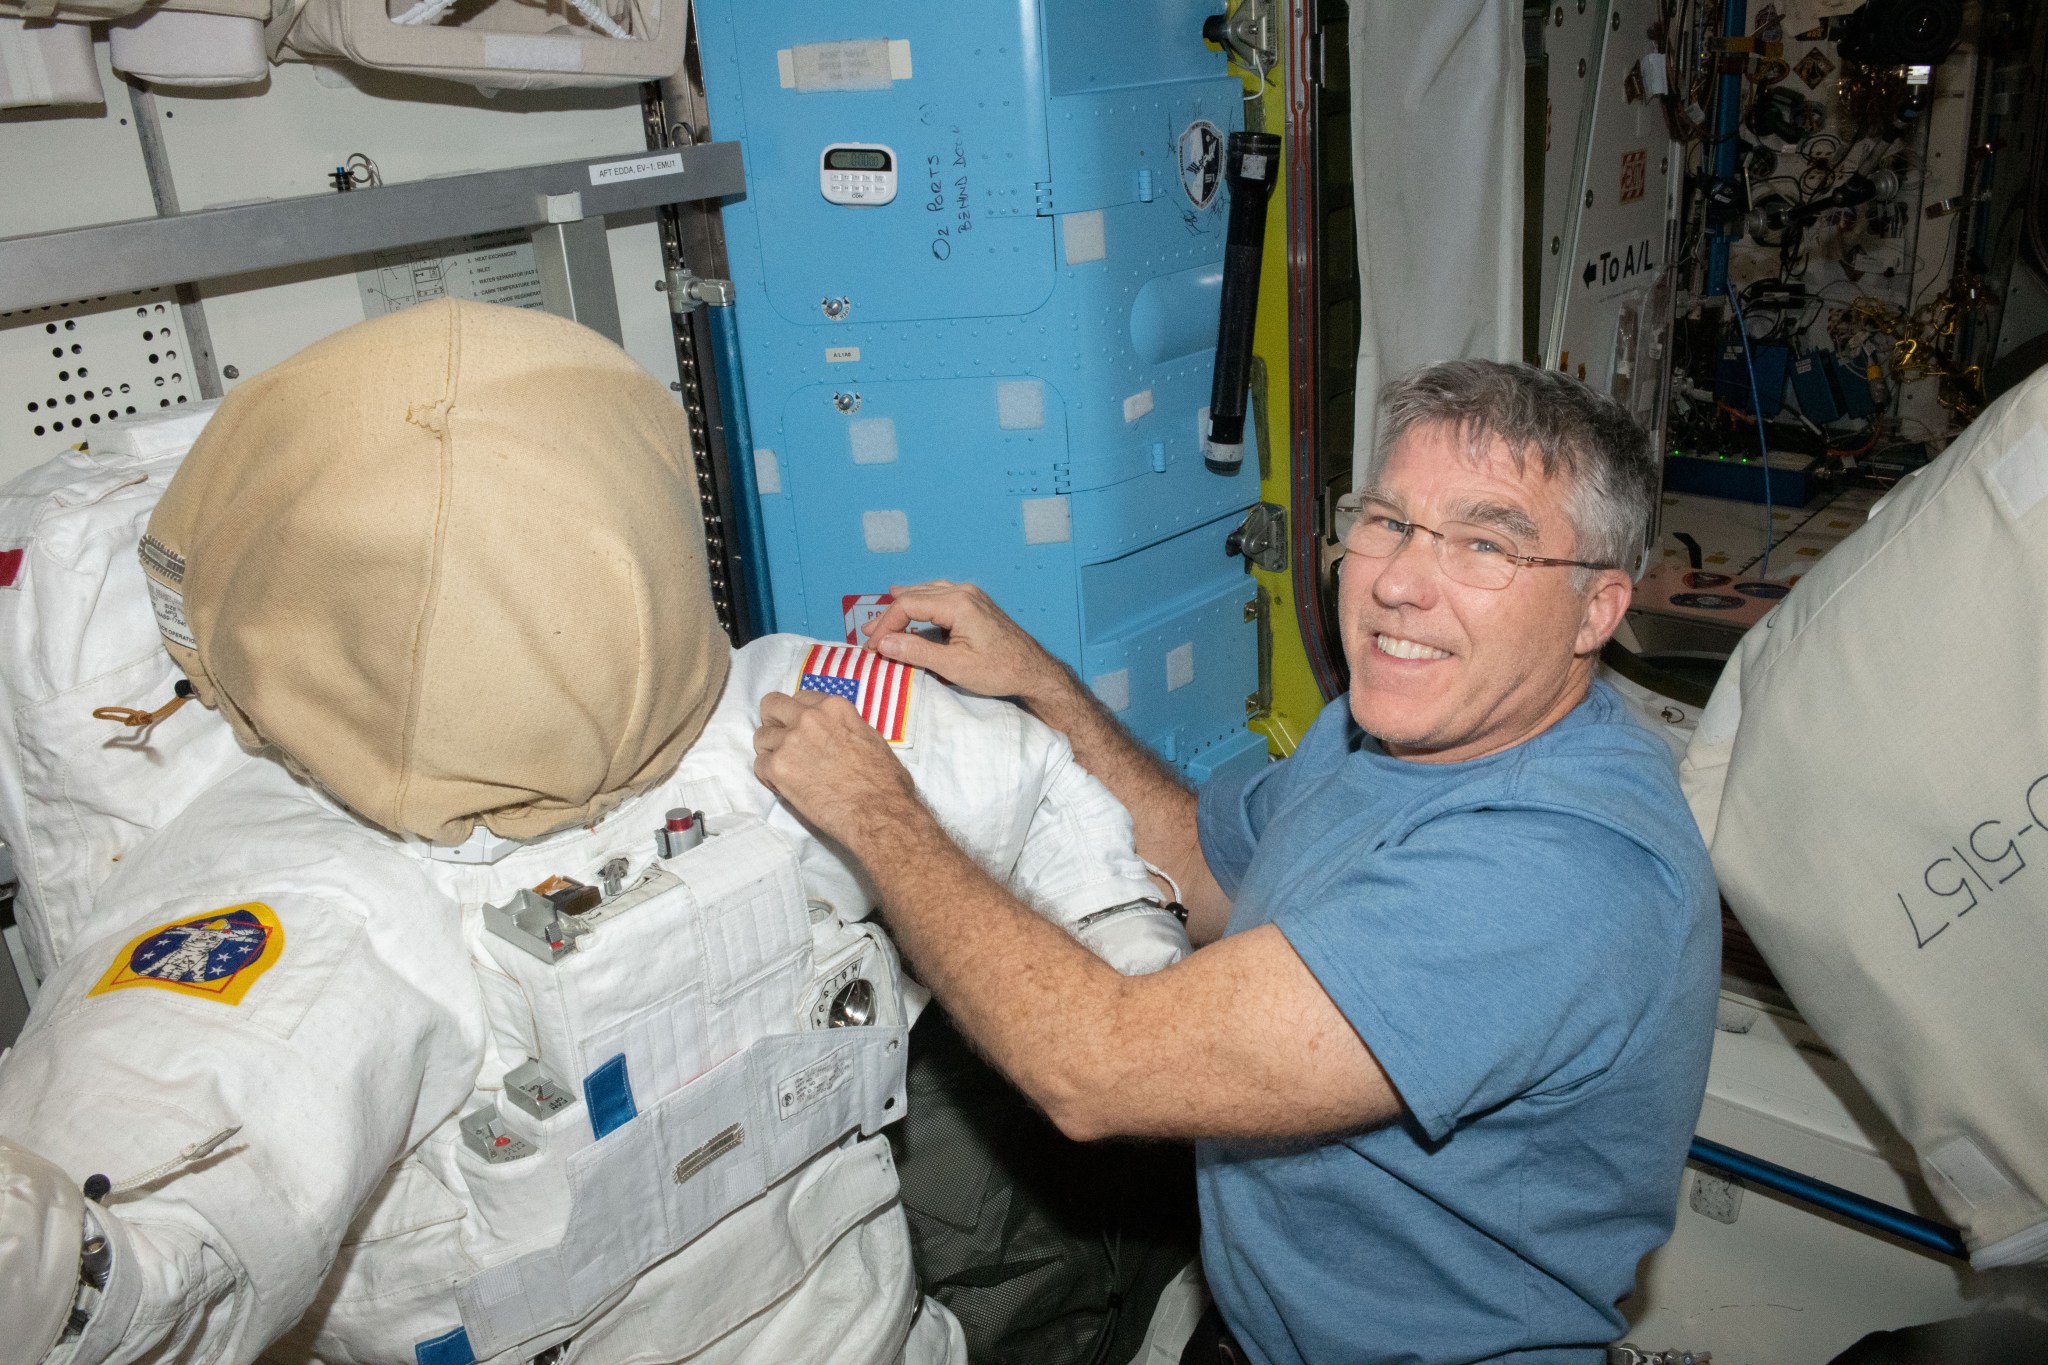 NASA astronaut Stephen Bowen prepares for a spacewalk to continue preparations for installing new solar arrays, part of ongoing work to increase power for space station research and operations.